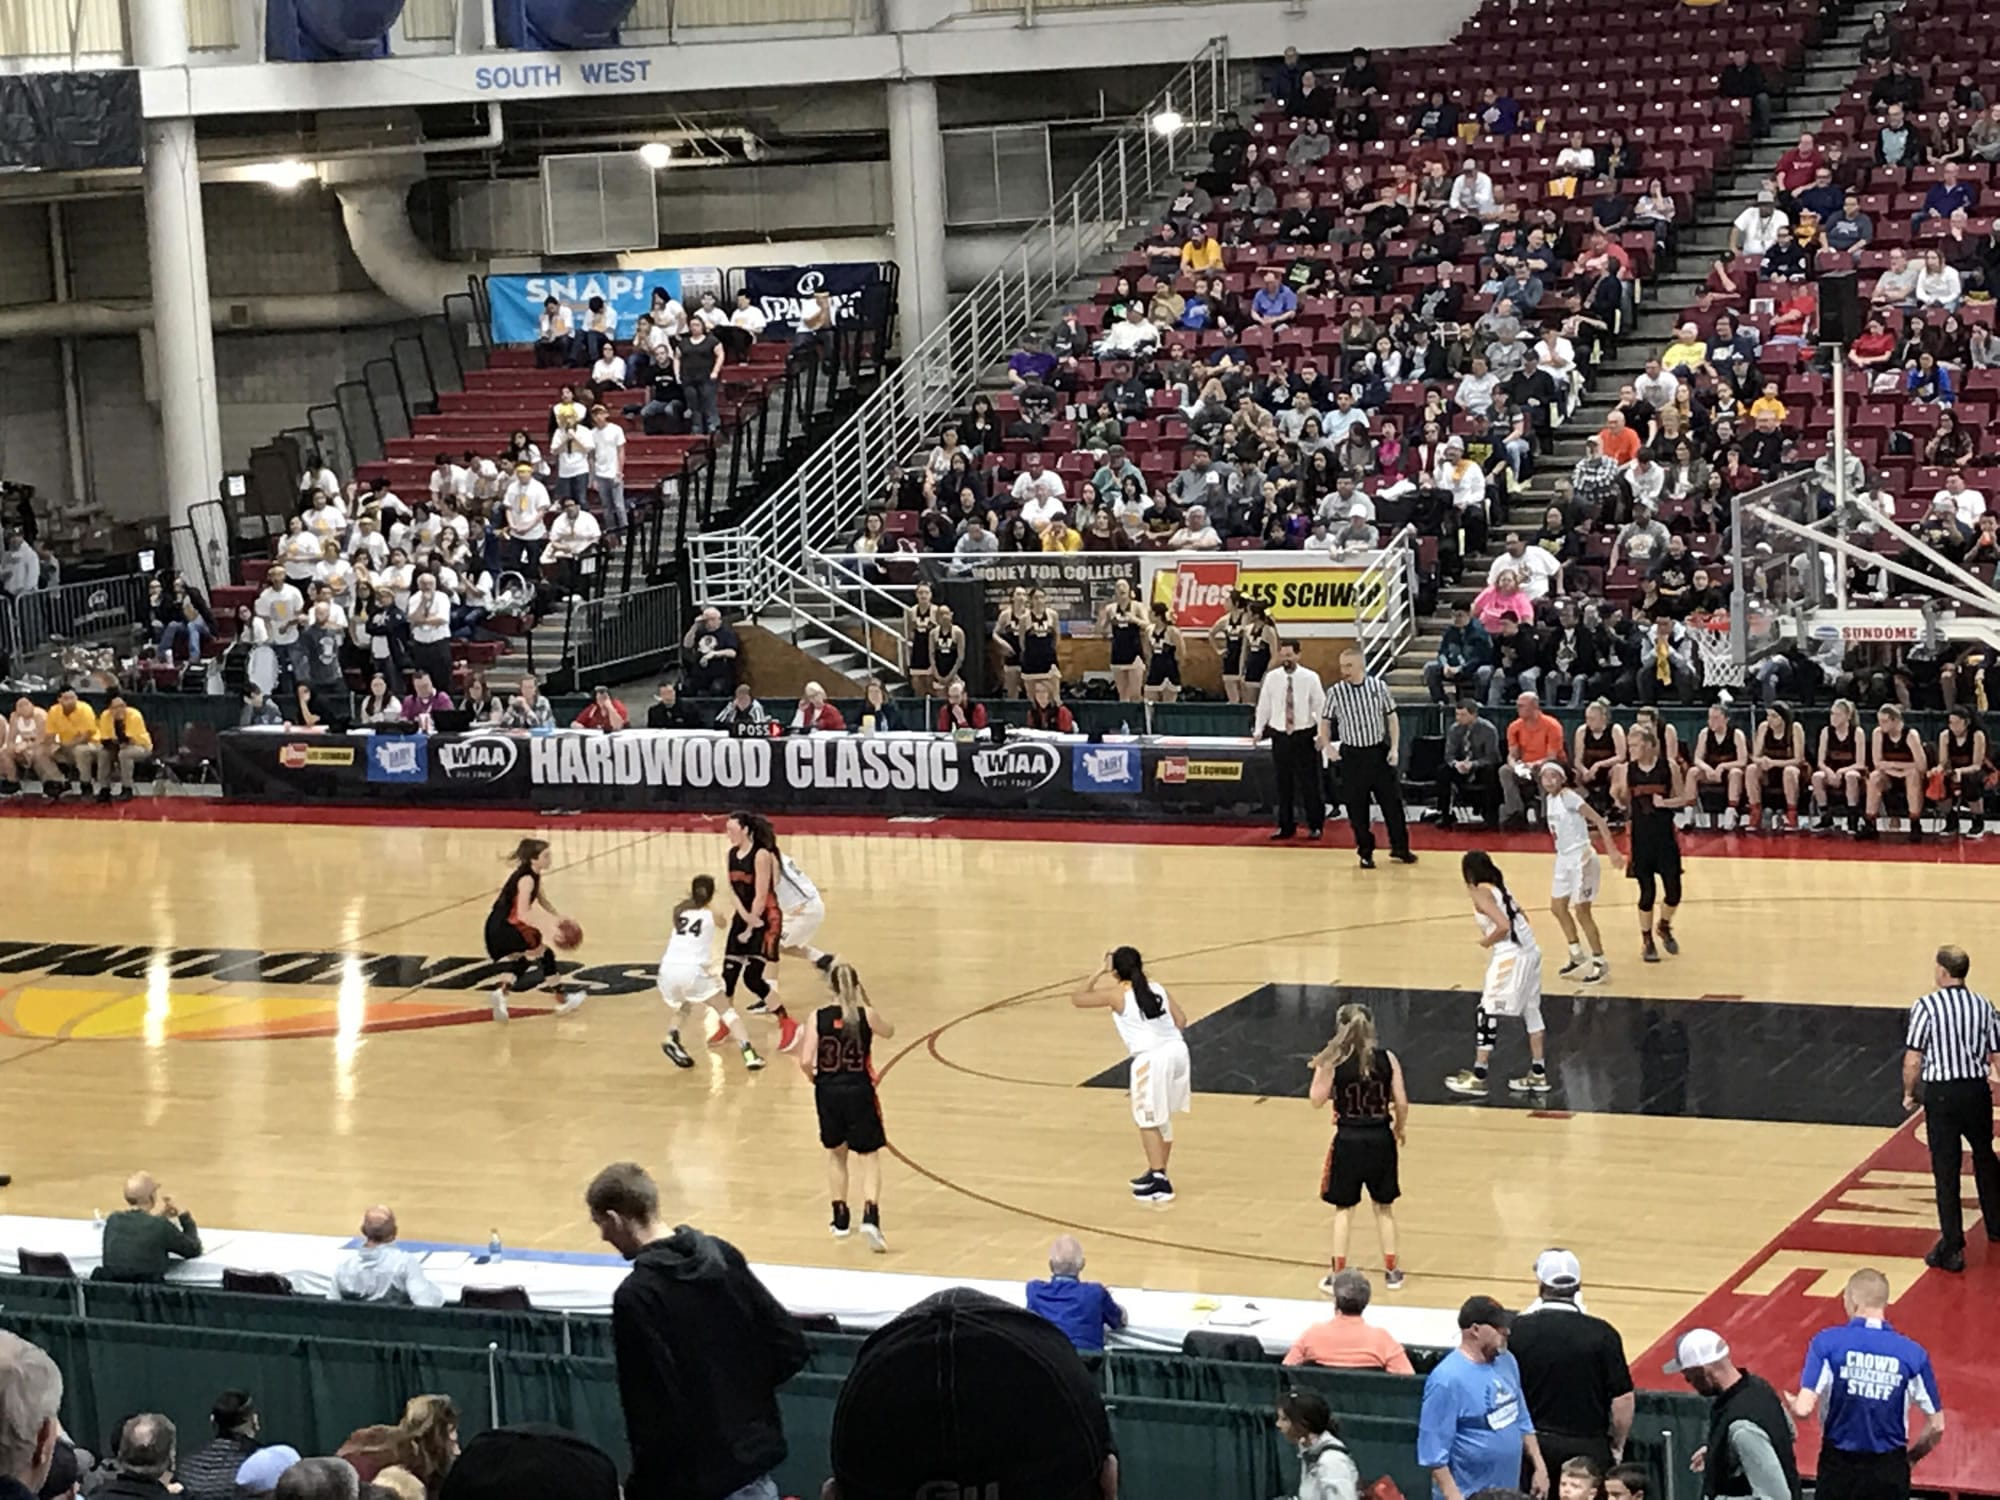 Mason Oberg (with ball) scored 13 points to lead the Washougal Panthers during Friday's 63-44 loss to Wapato in the 2A consolation semifinals.